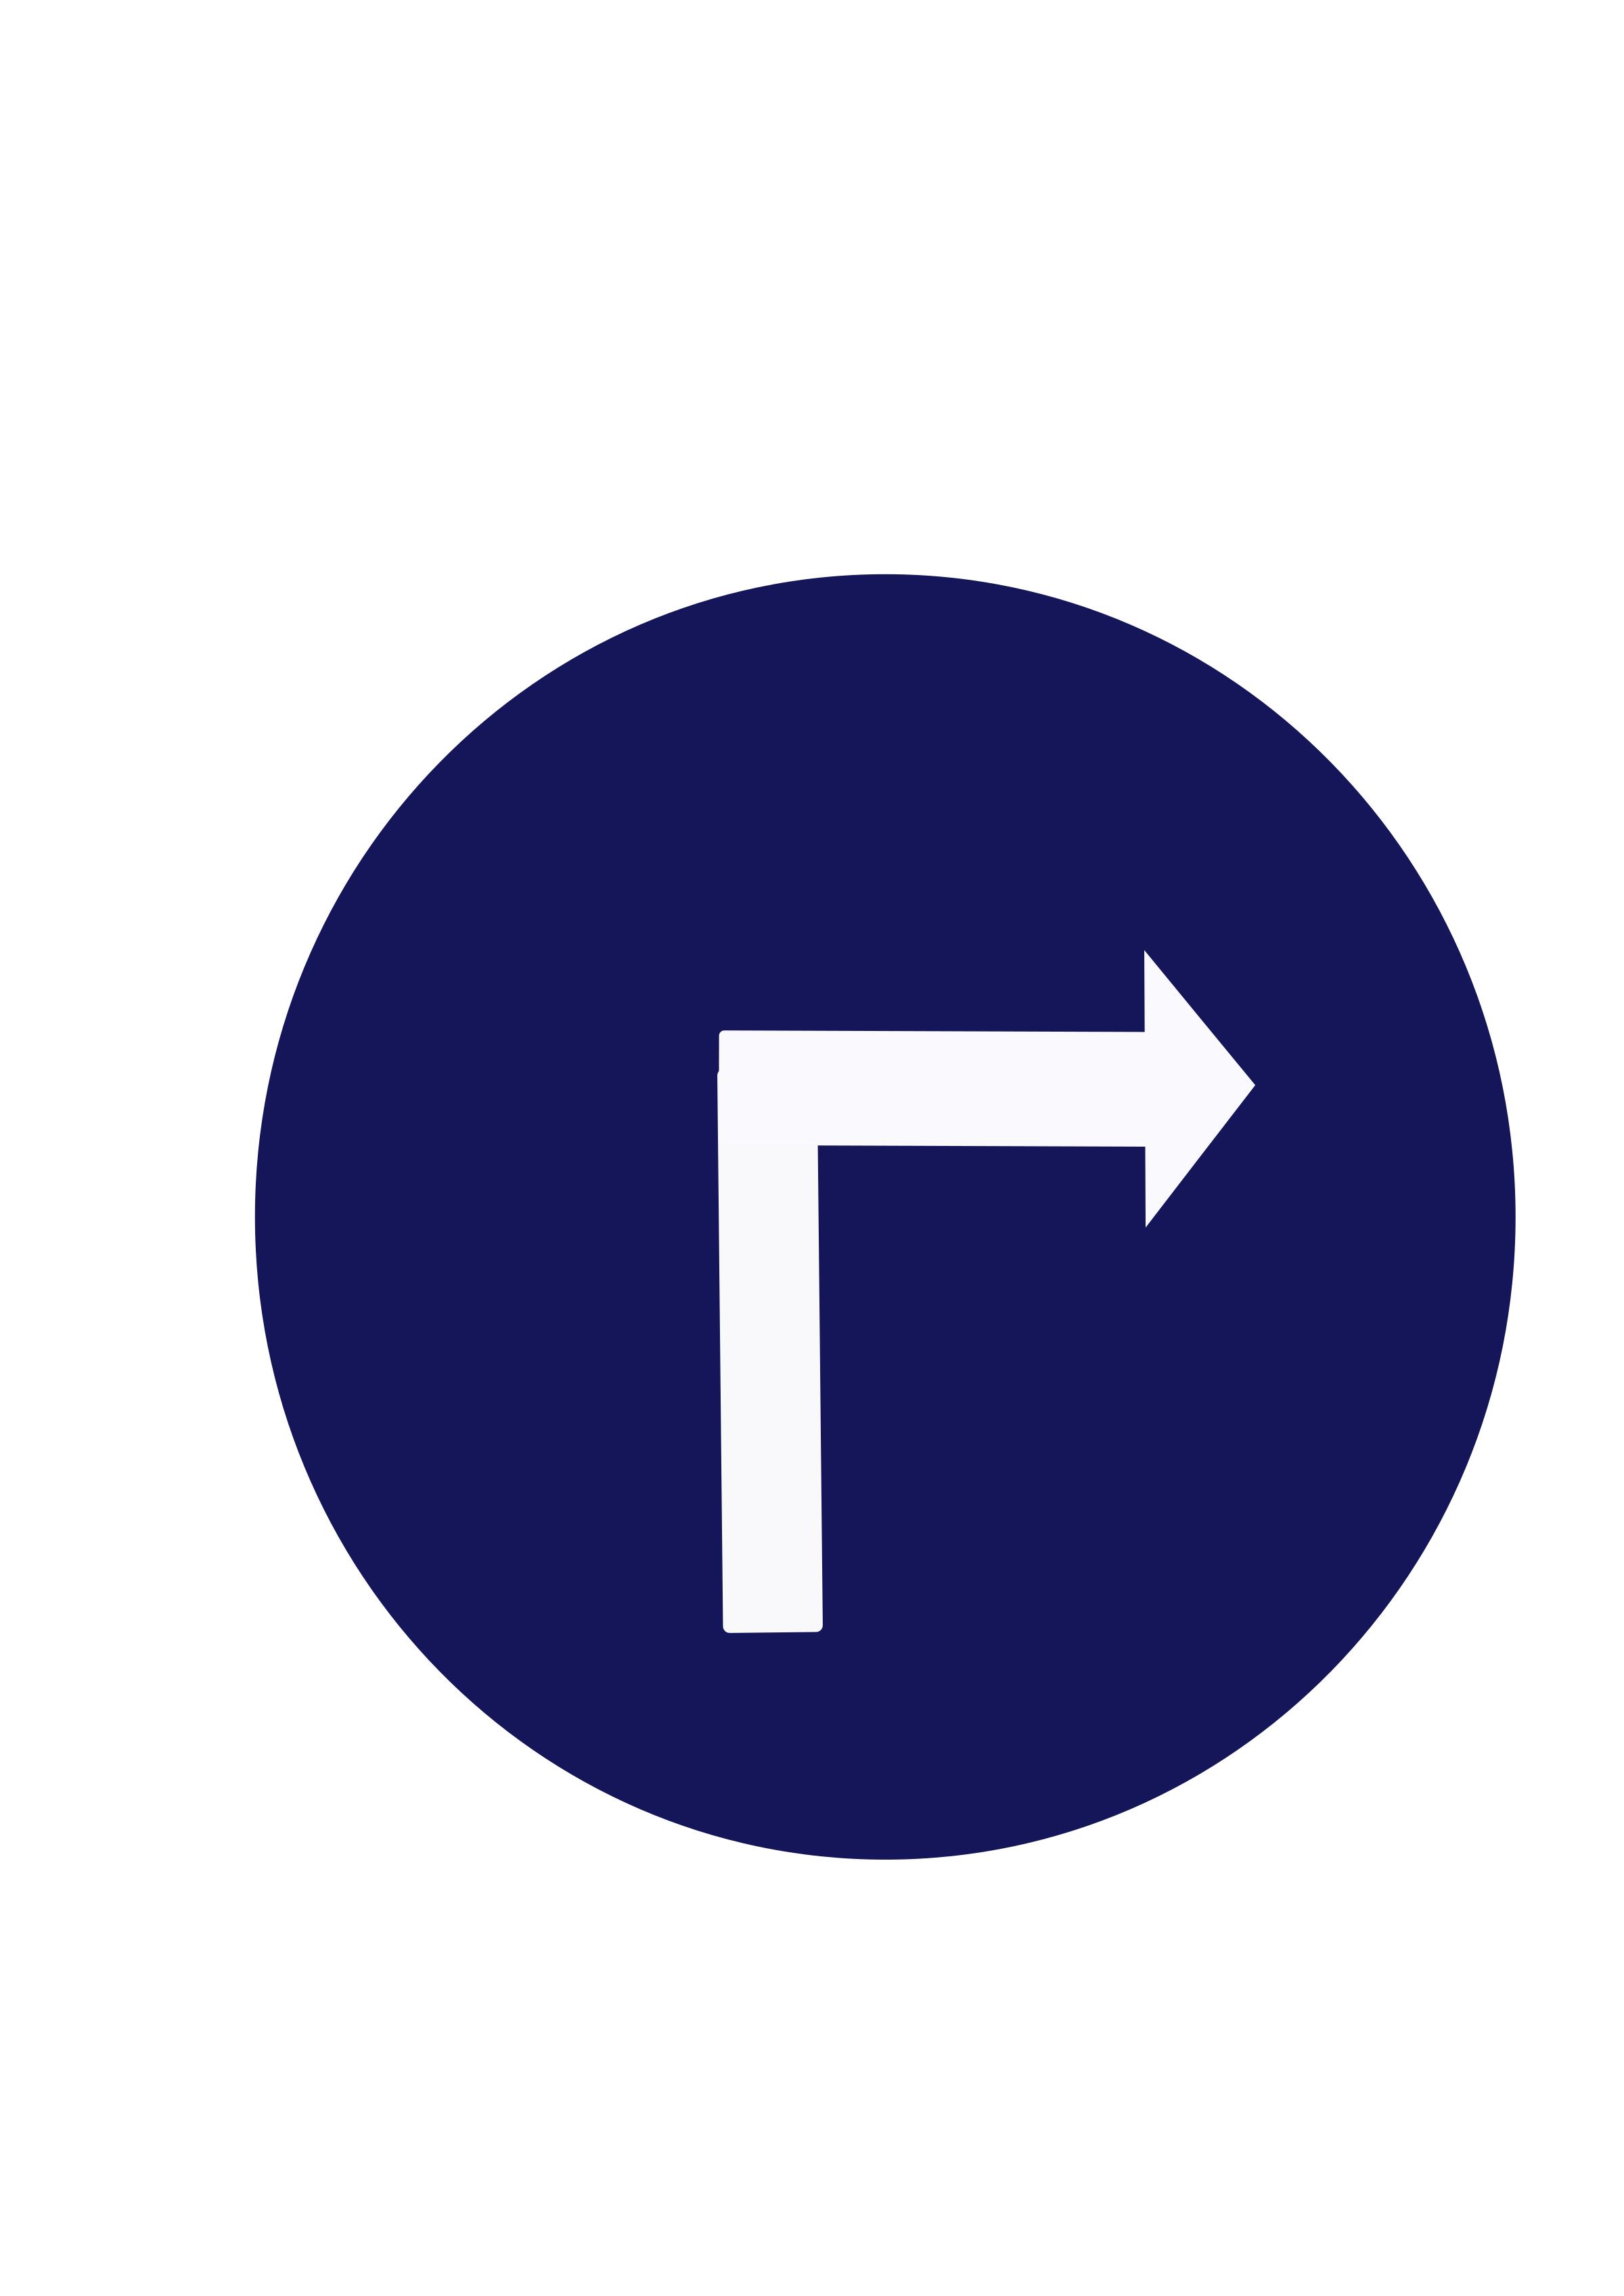 Indian road sign - Compulsory turn right png